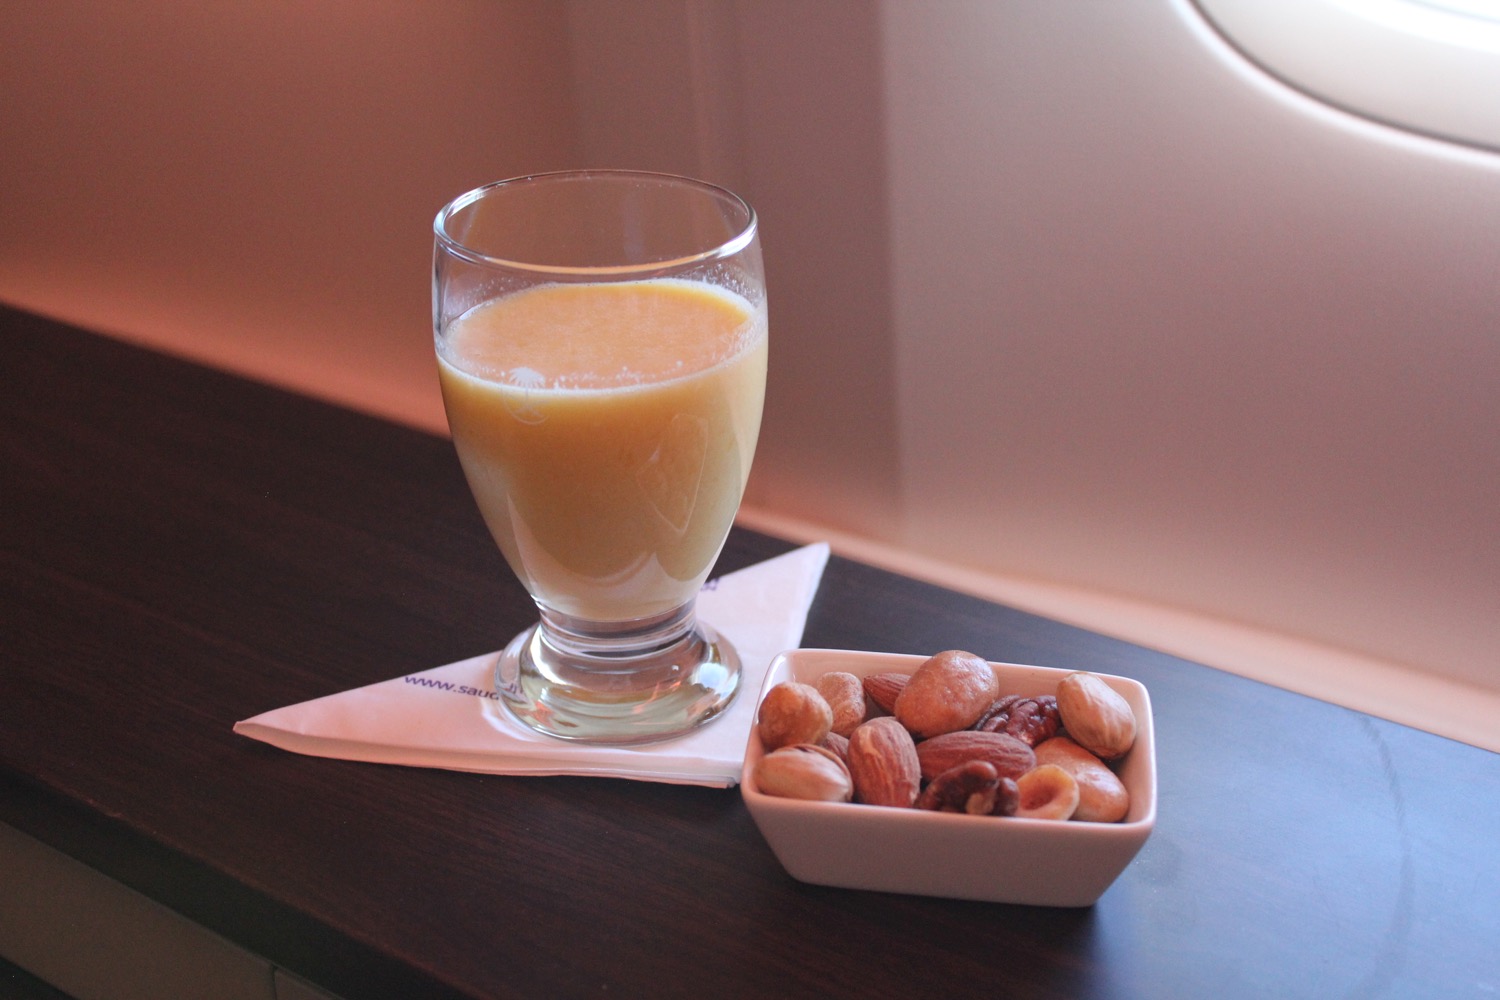 1 glass of orange juice and 1 glass of nuts